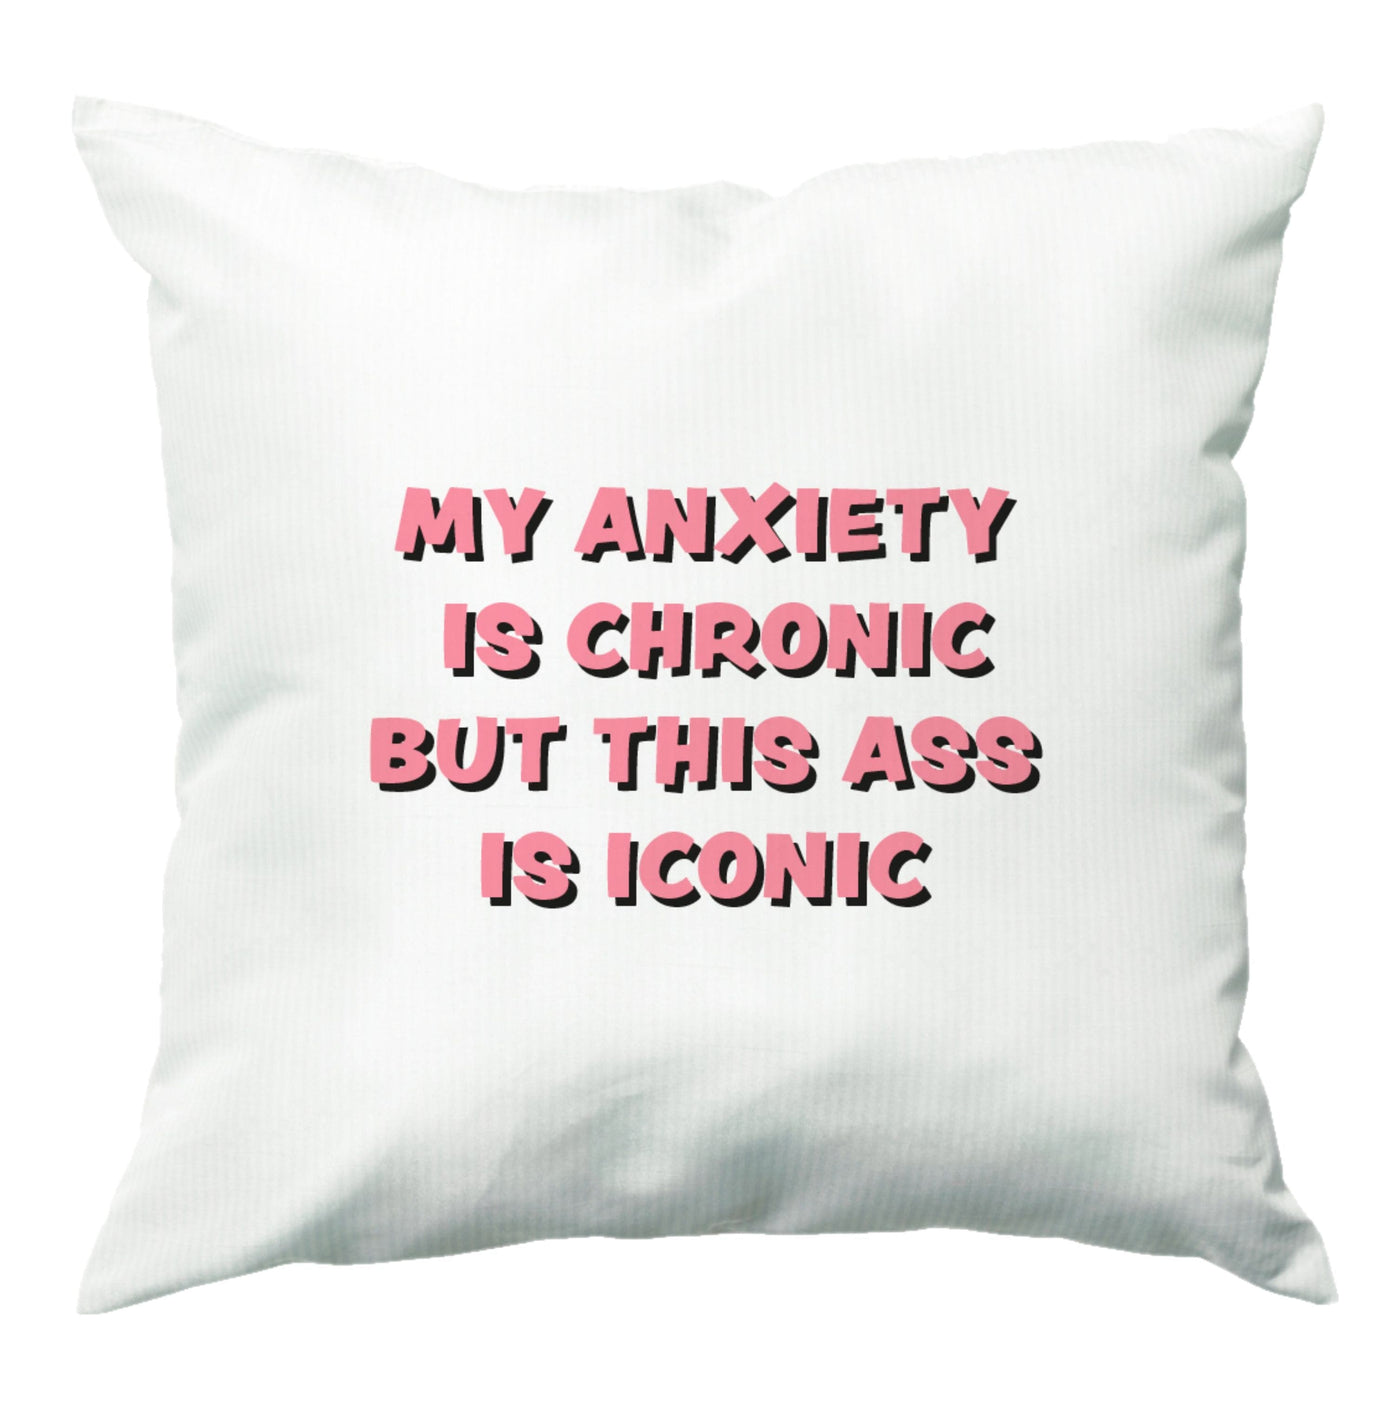 My Anxiety Is Chronic But This Ass Is Iconic Cushion